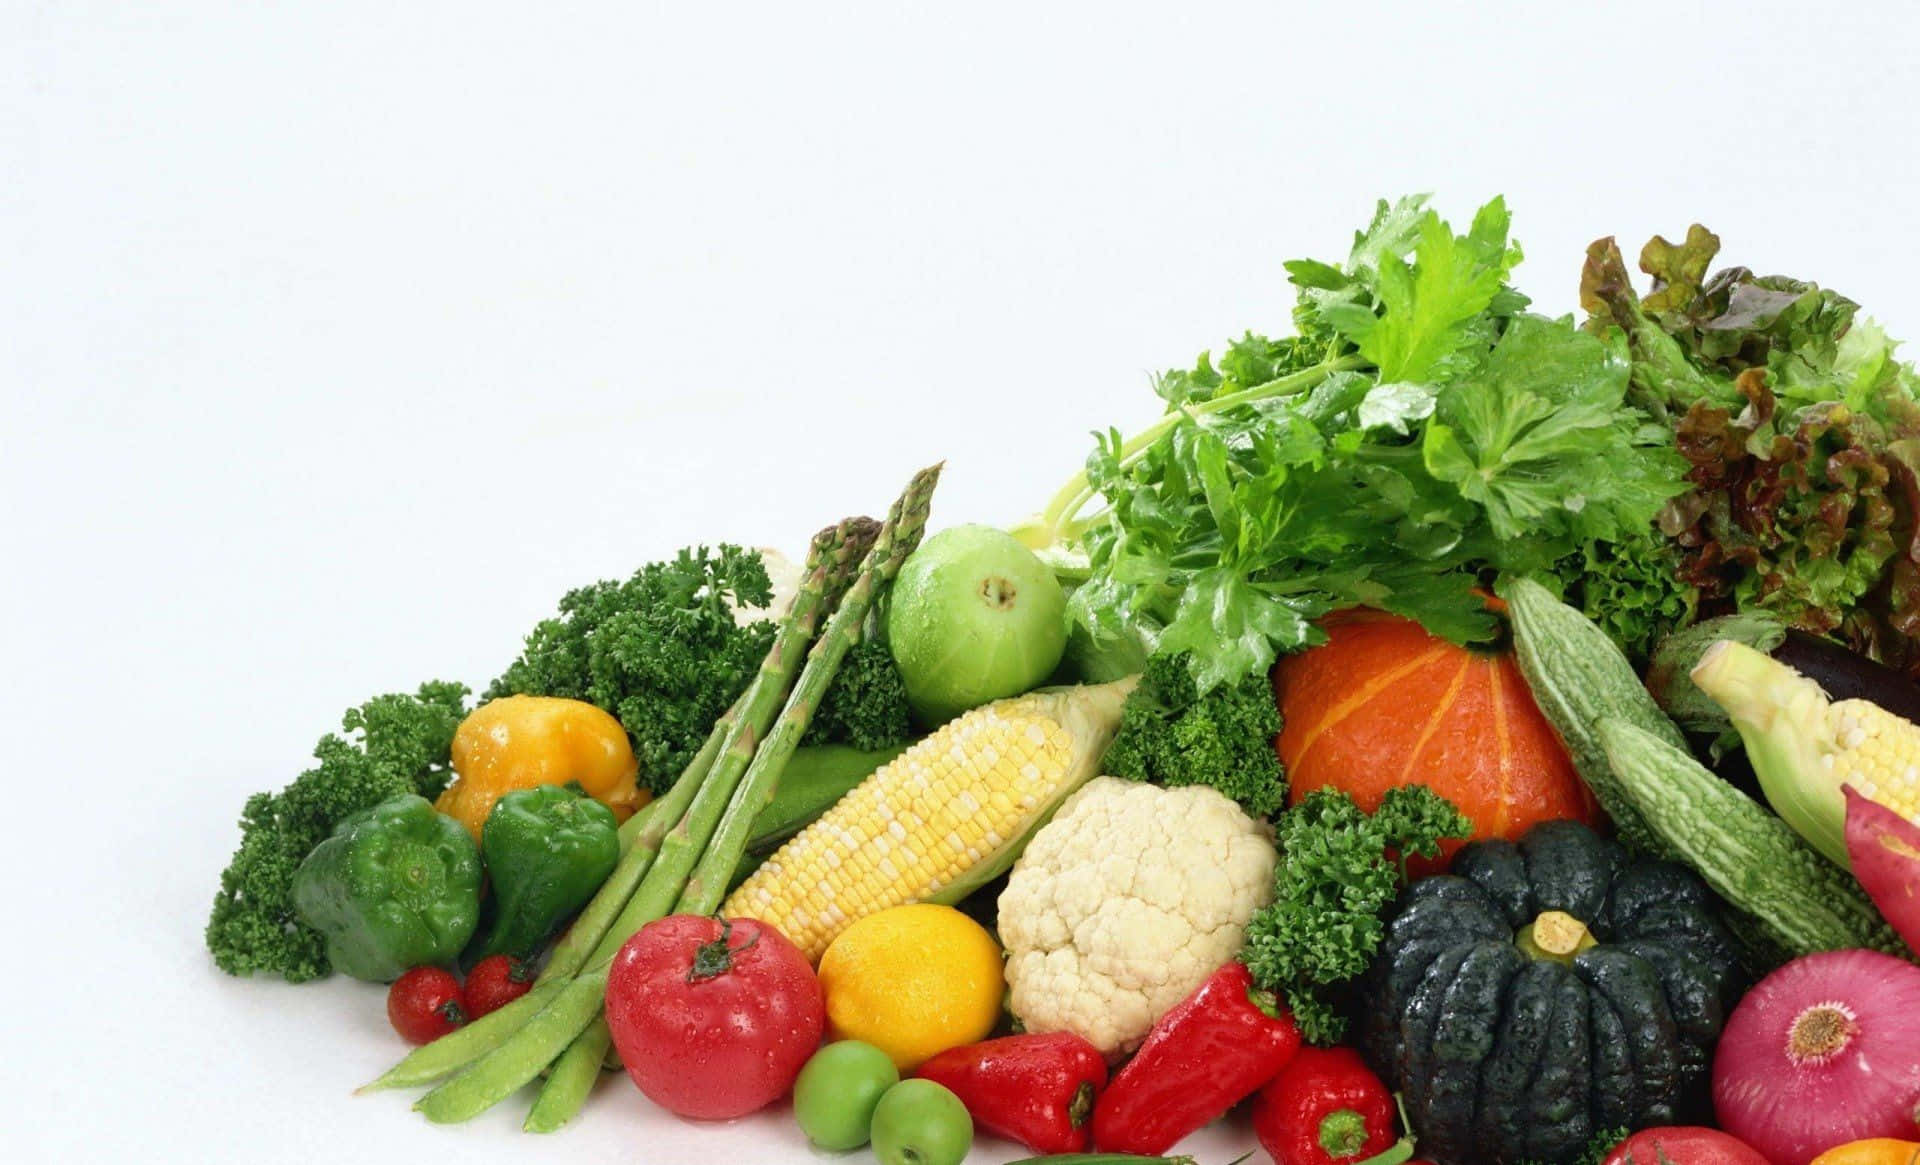 Vegetables Against White Background Picture